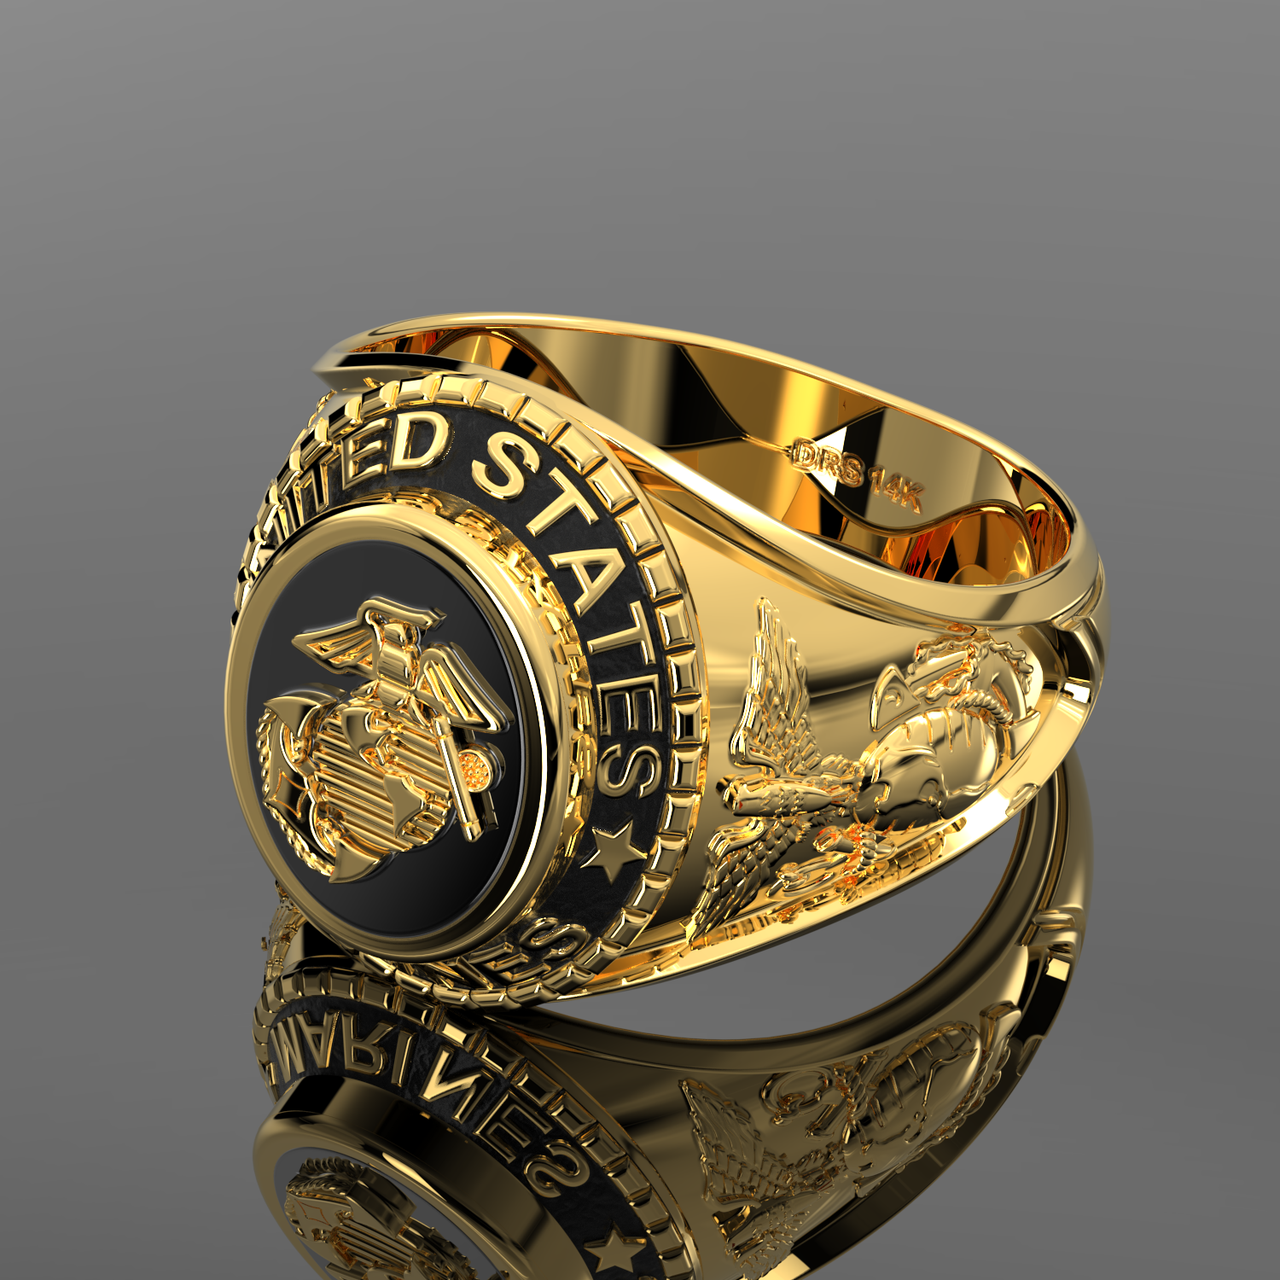 Customizable Medium Size Men's 10k or 14k Yellow or White Gold United States Marine Corps Military Solid Back Ring